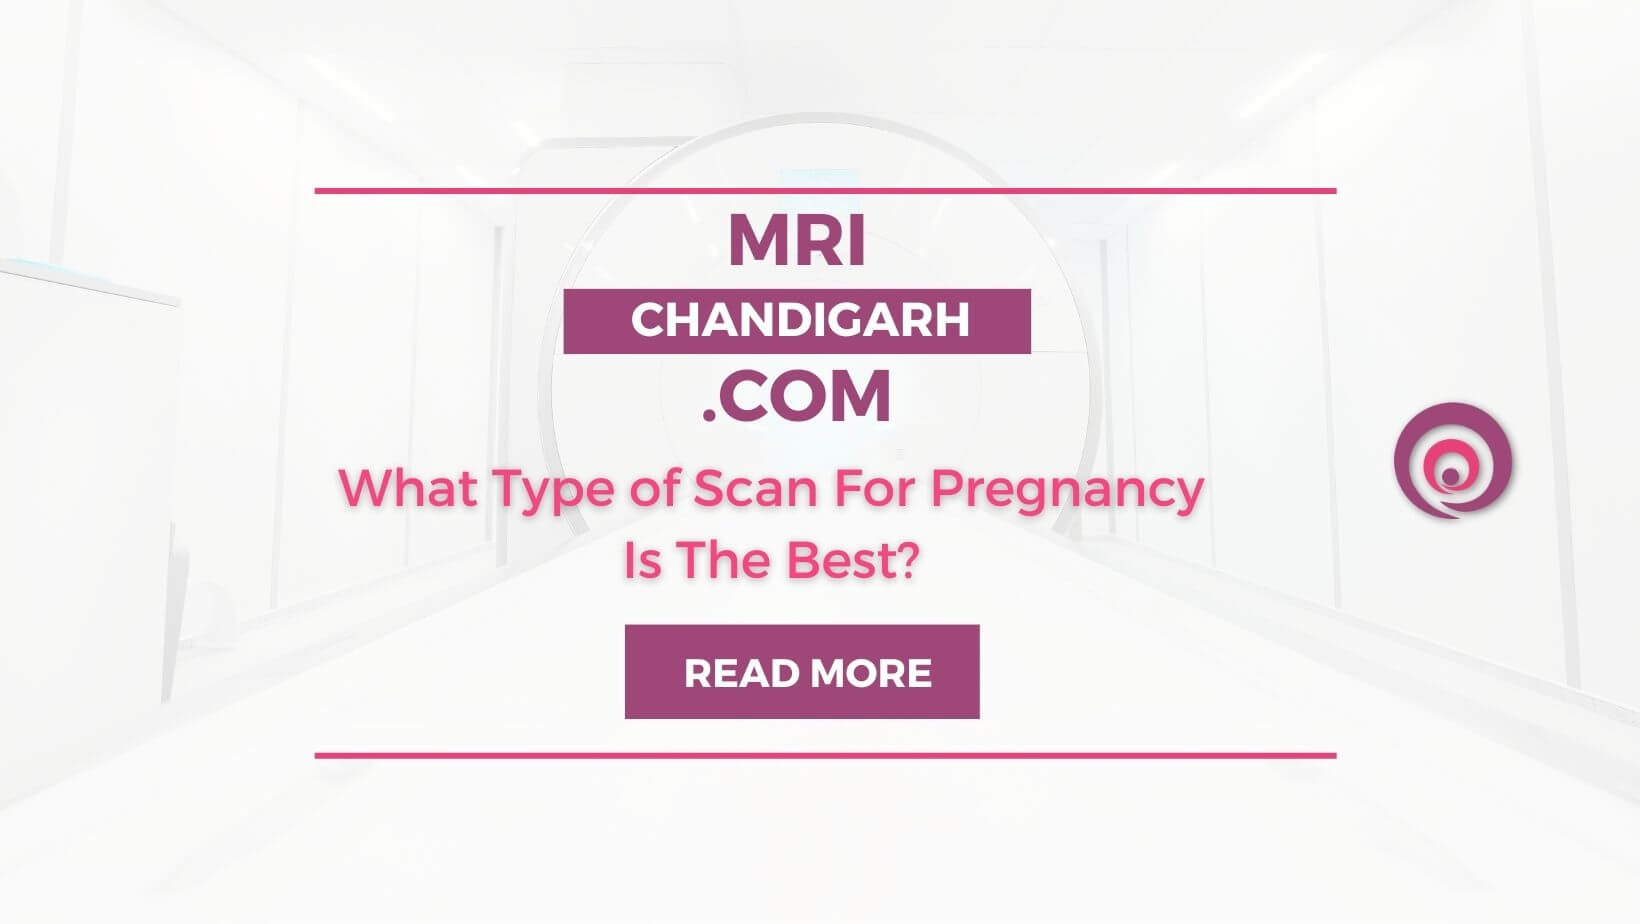 What Type of Scan For Pregnancy Is The Best?